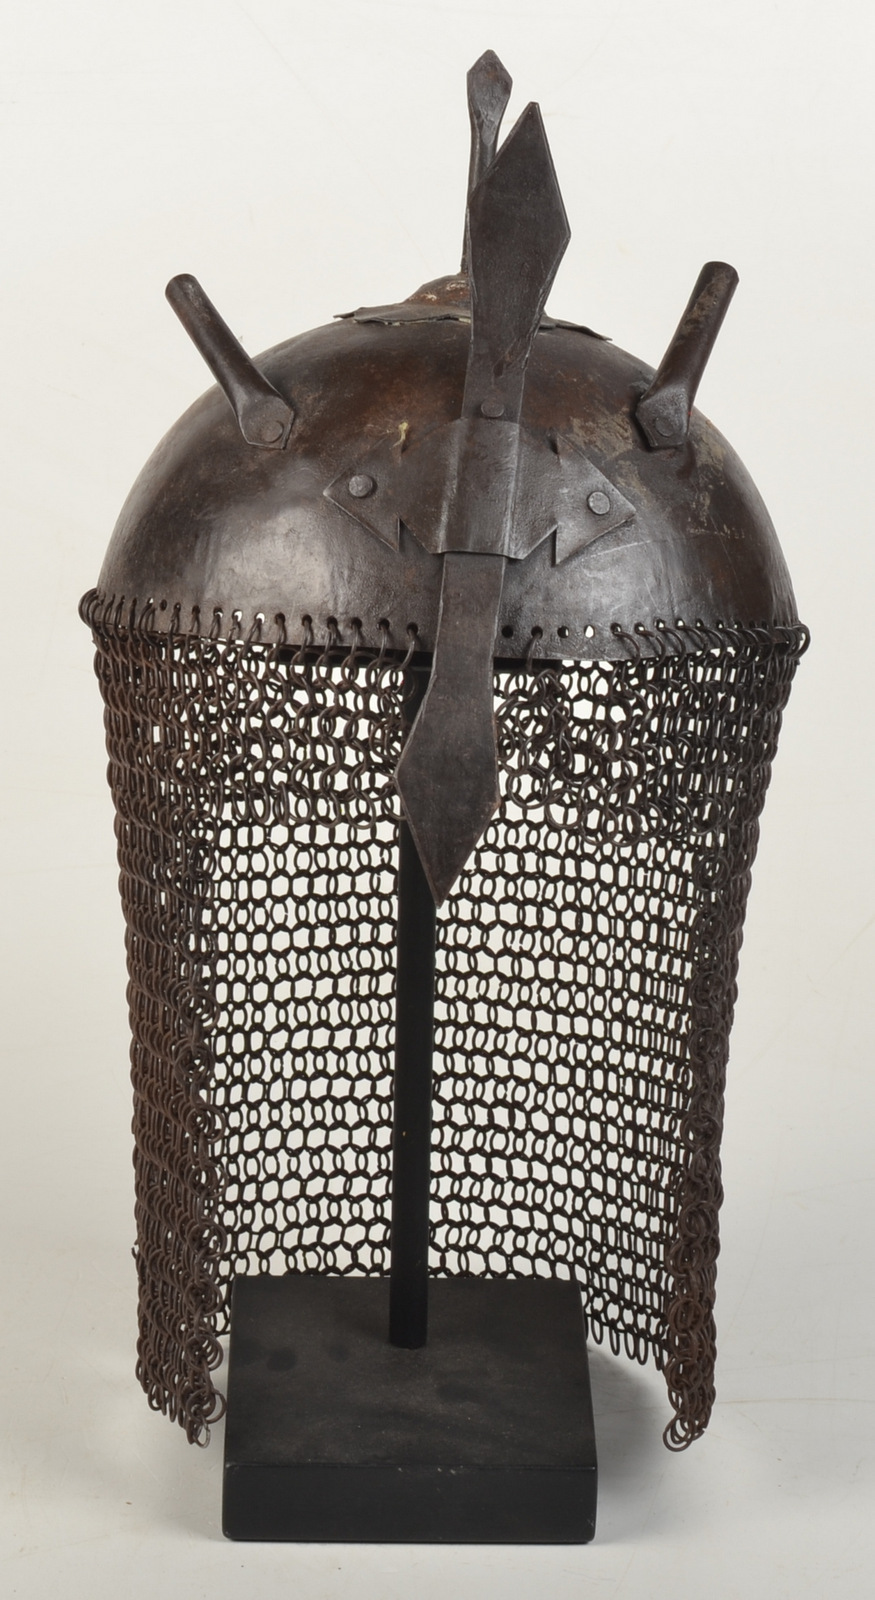 A 20th century Indo Persian Khula Khud helmet with an adjustable nose guard and pair of plume